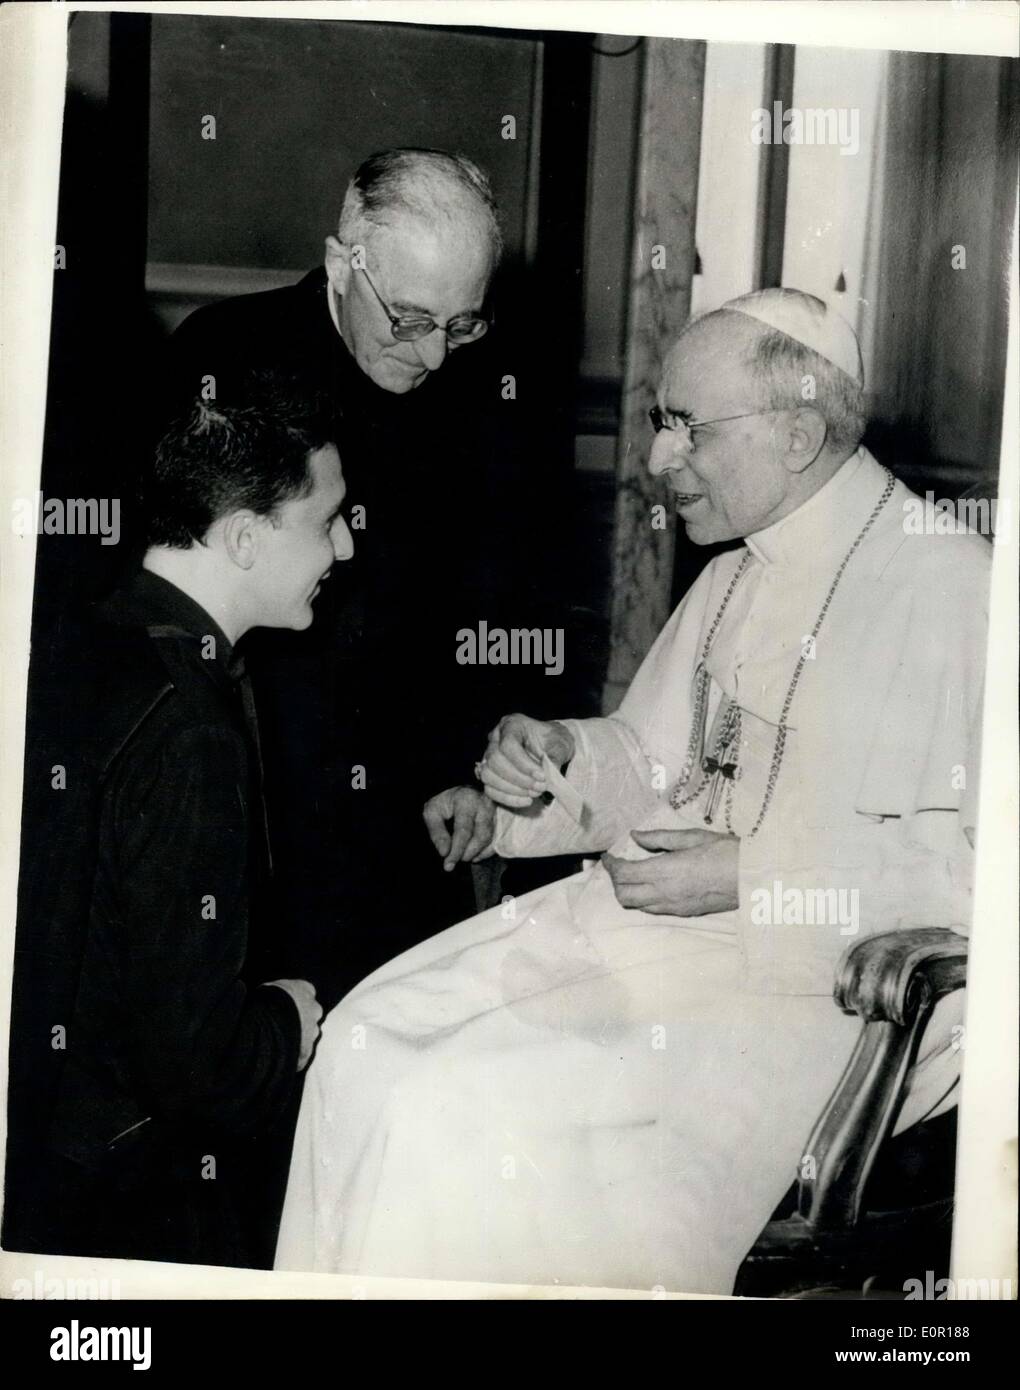 Sep. 12, 1957 - The Pope receives the Jesuits in Rome; His Holiness The Pope received members of the Jesuits when he attends a special meeting at CasterGandolfo. Photo Shows The Pope receives the youngest Jesuit presented to him by the ''Black Pope'' Janssens at Castelgandolfo. Stock Photo